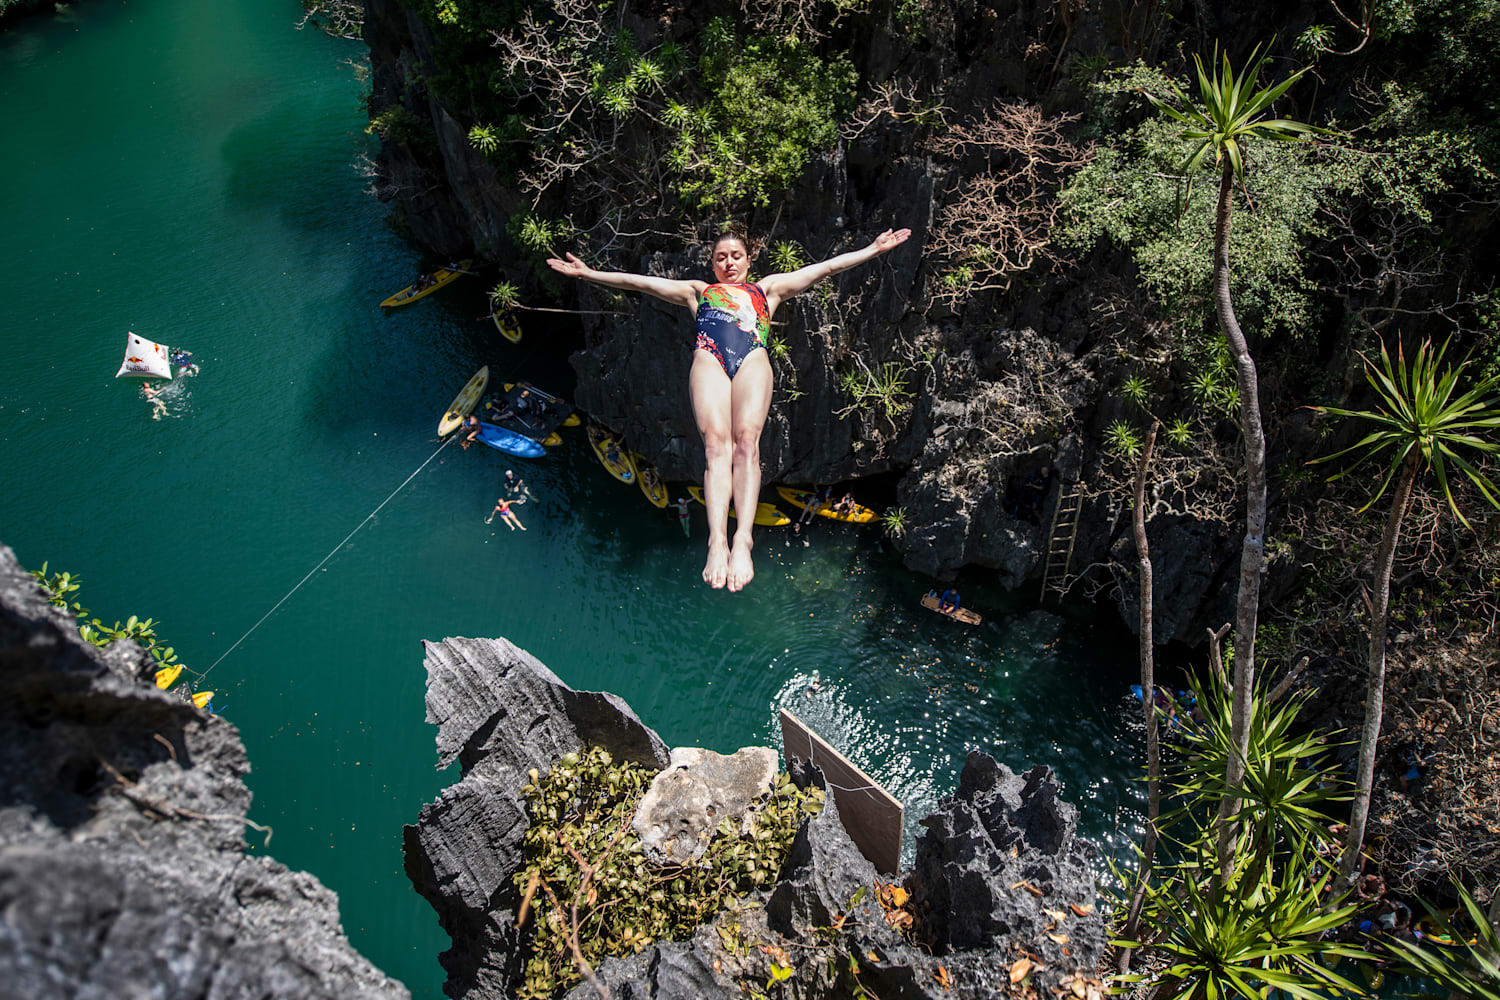 Red Bull Cliff Diving El Nido 2019 Live Event